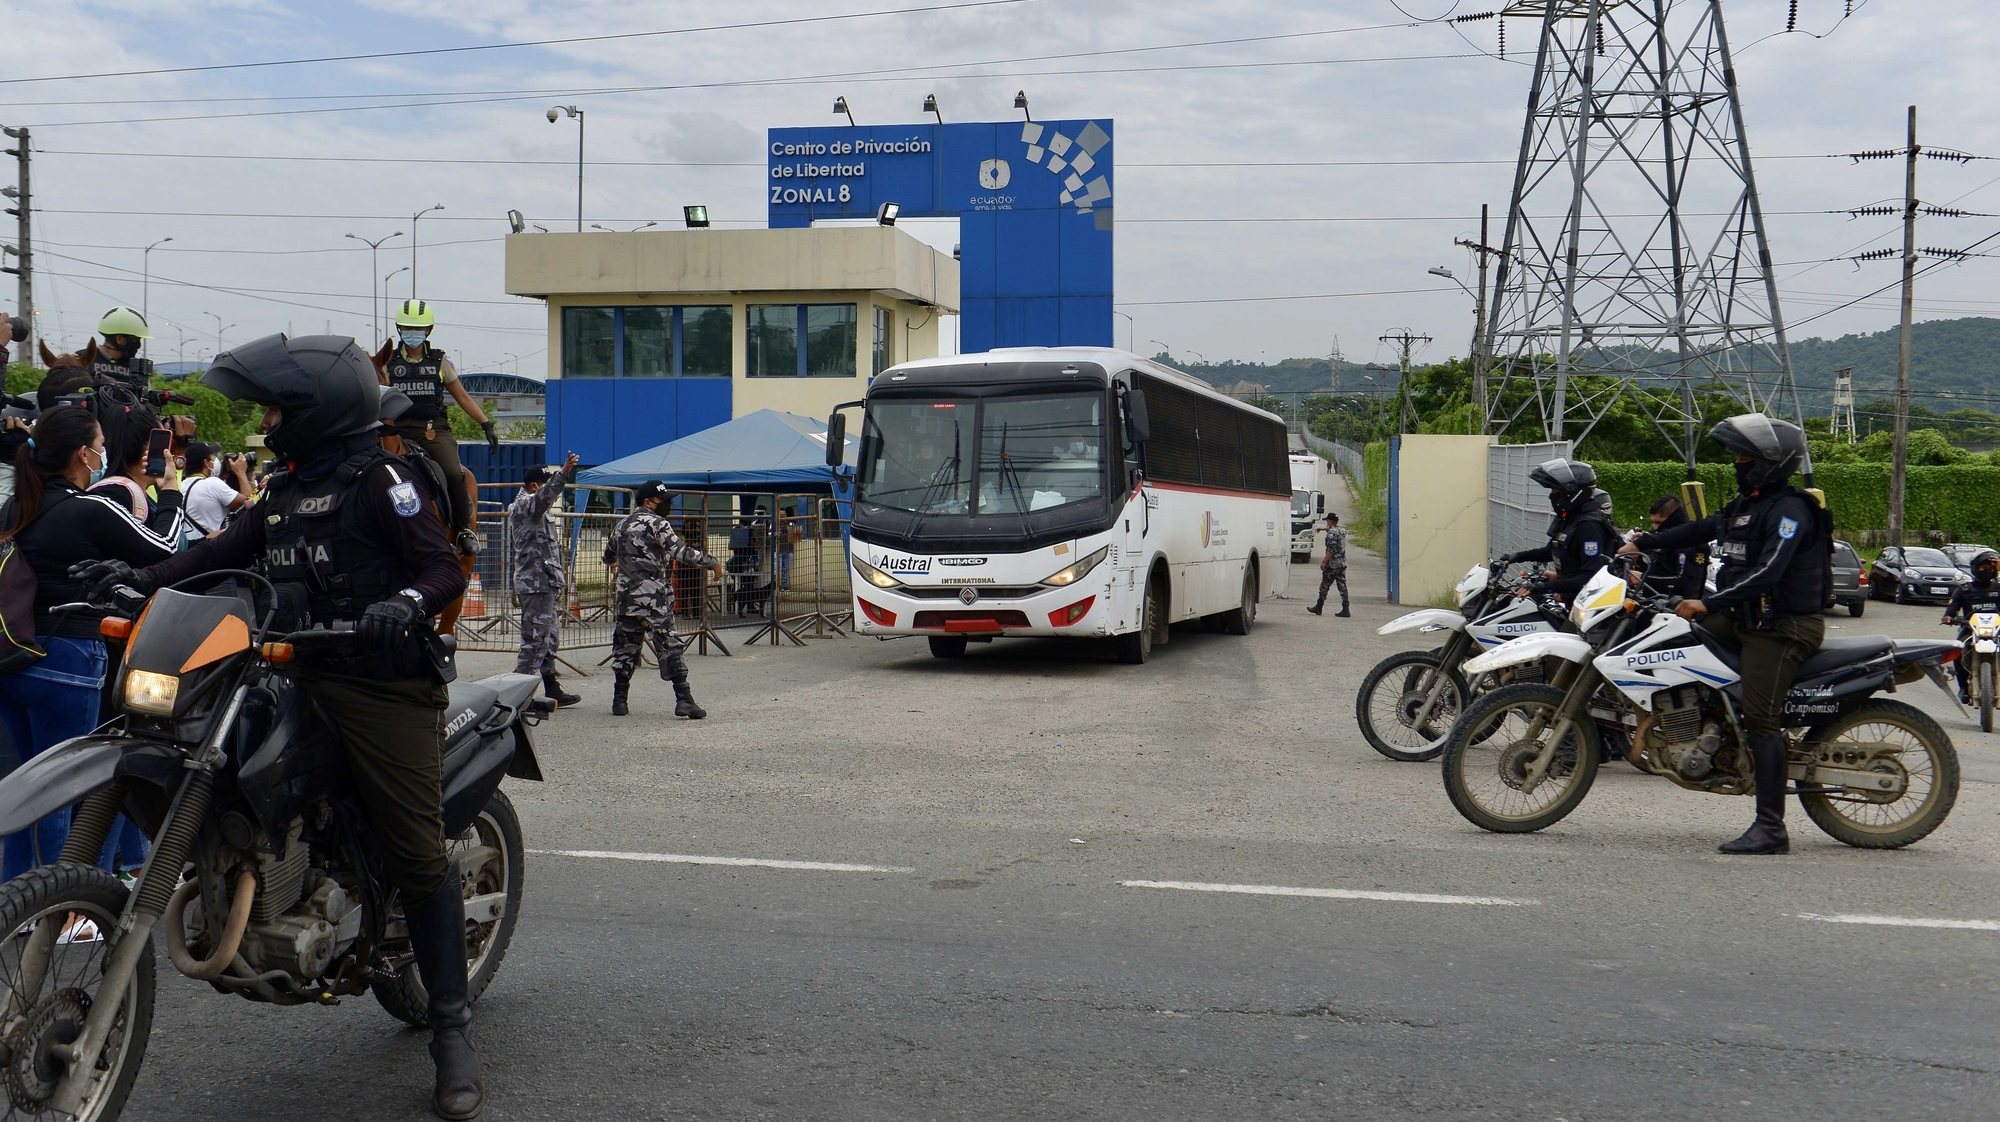 epa09036460 Prison authorities transfer 32 inmates by bus from the Guayaquil prison, Ecuador, 25 February 2021. The penitentiary authorities of Ecuador transferred 32 inmates on 25 February from the Guayaquil jail to another in the country that has not been released, apparently, as a preventive measure to stop the wave of riots in recent days in that prison.  EPA/Marcos Pin